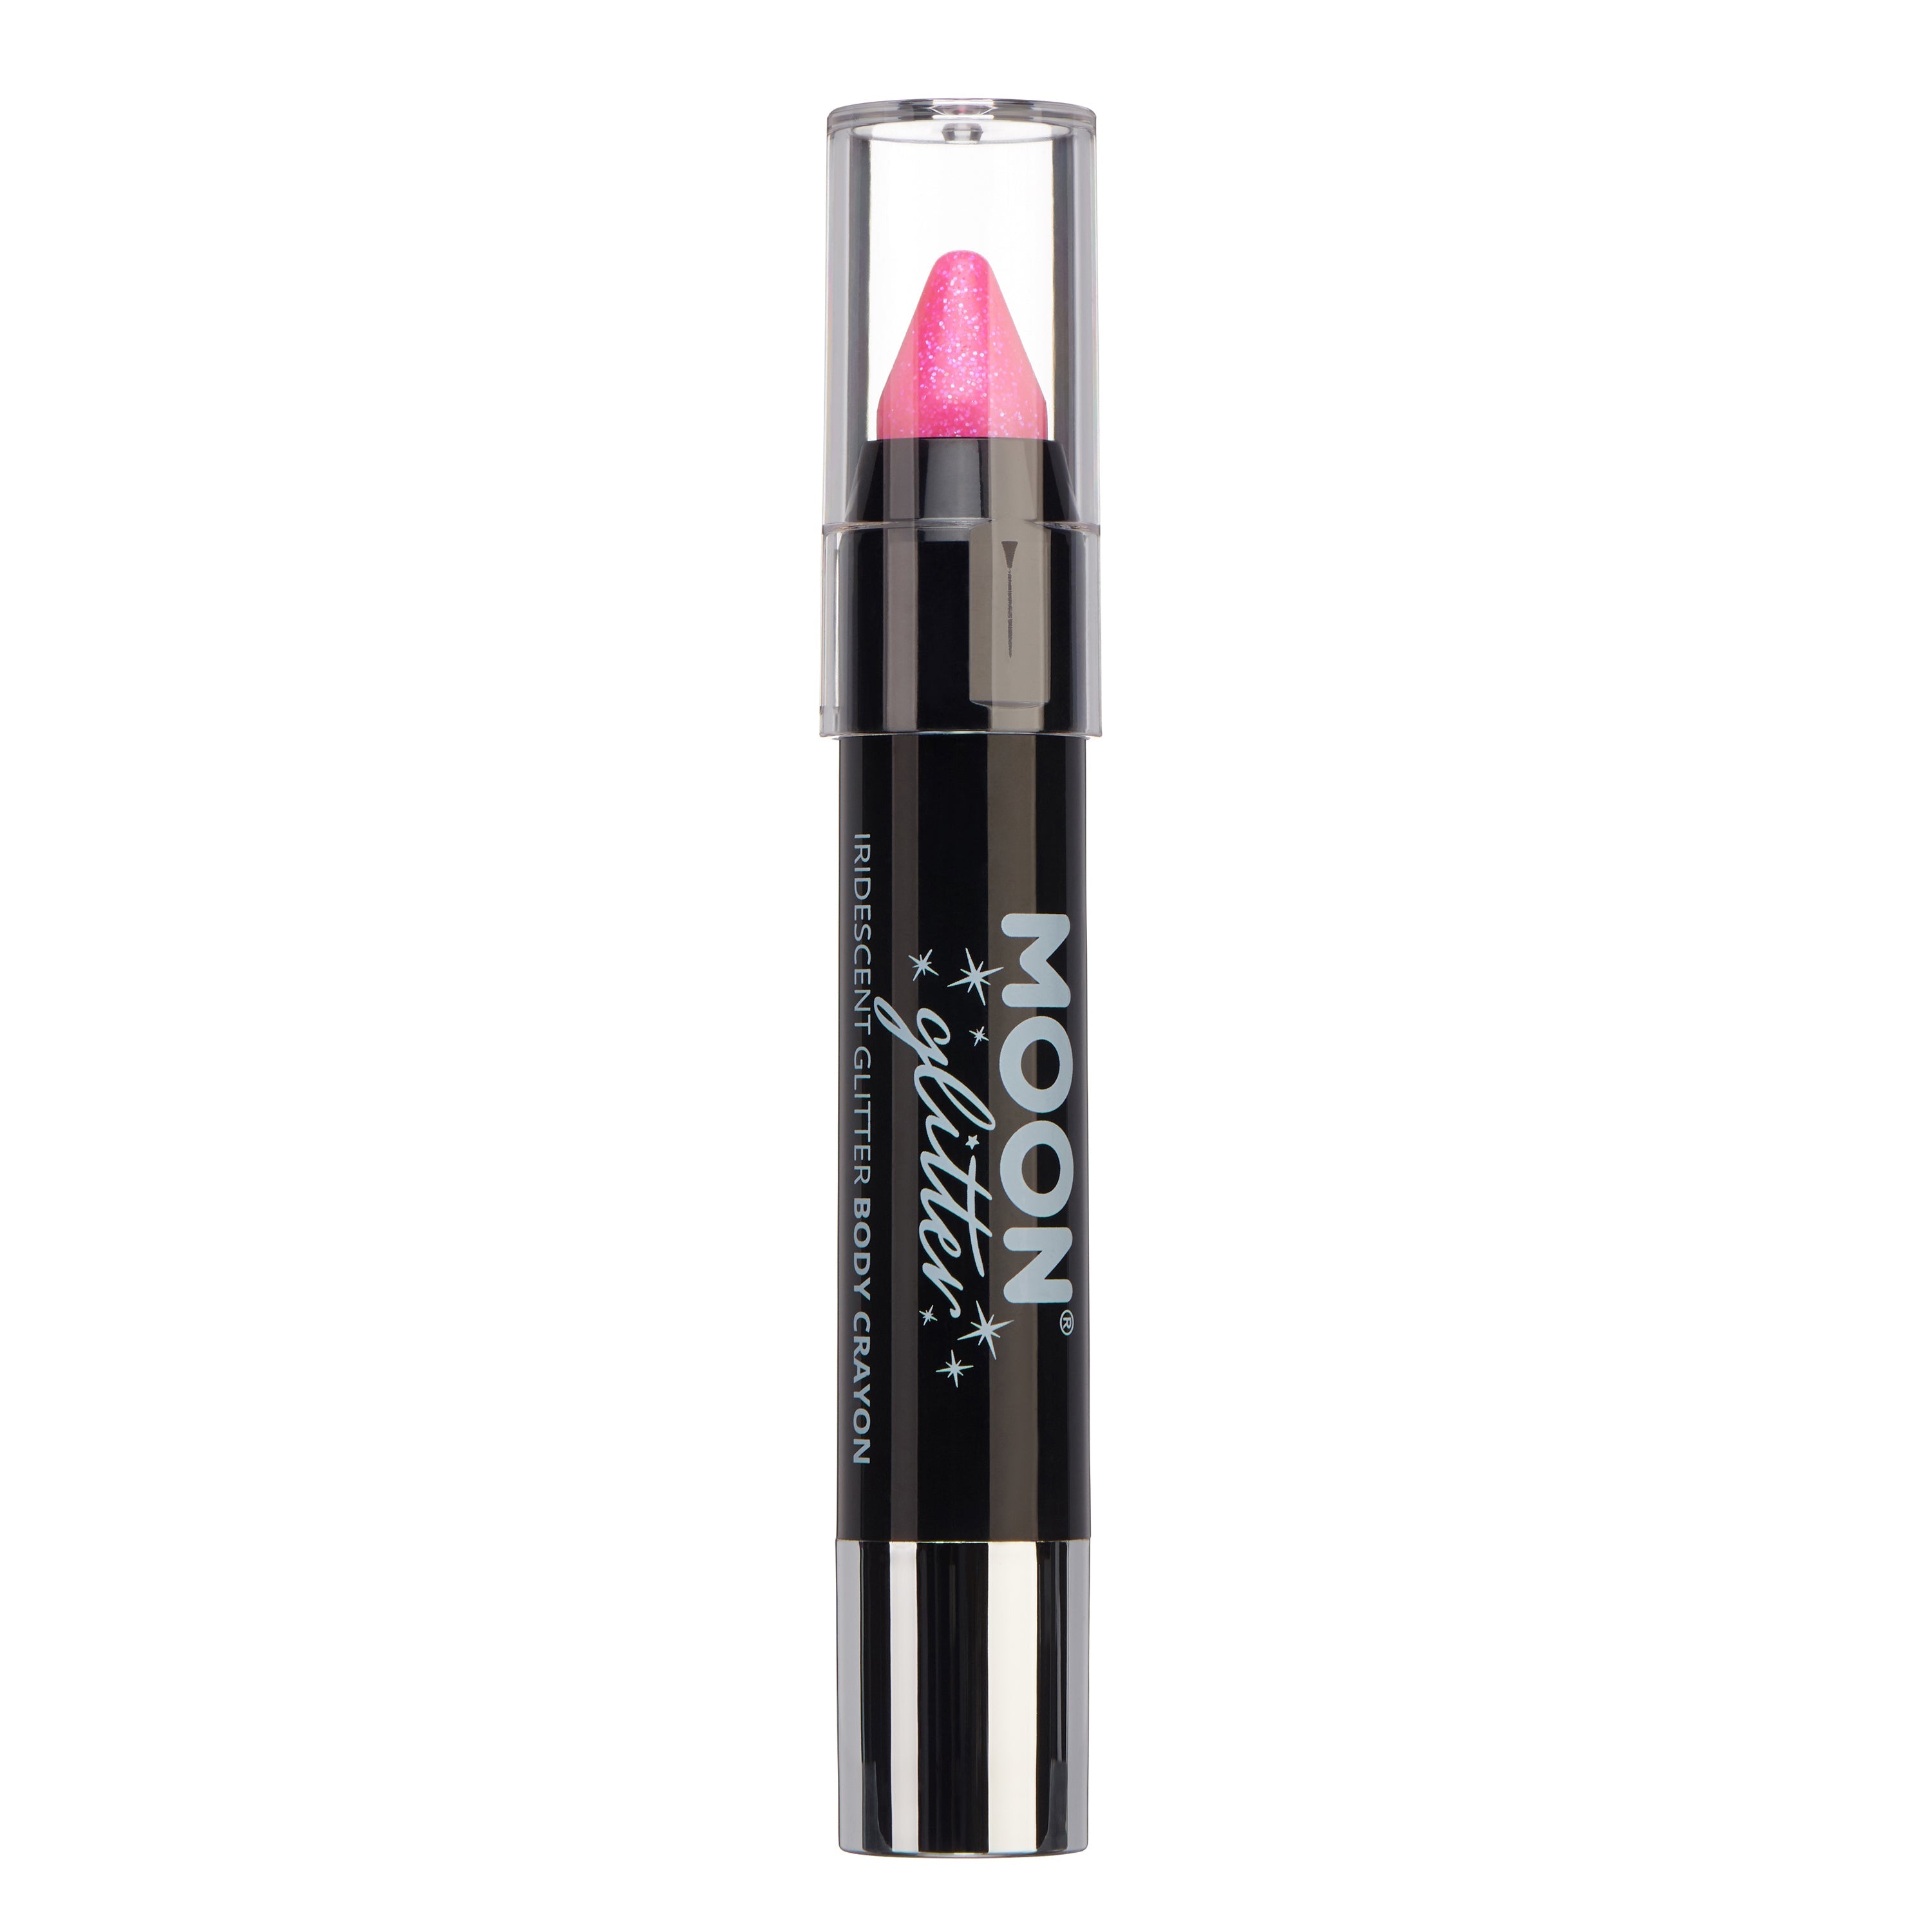 Pink - Iridescent Glitter Face & Body Crayon. Cosmetically certified, FDA & Health Canada compliant and cruelty free.